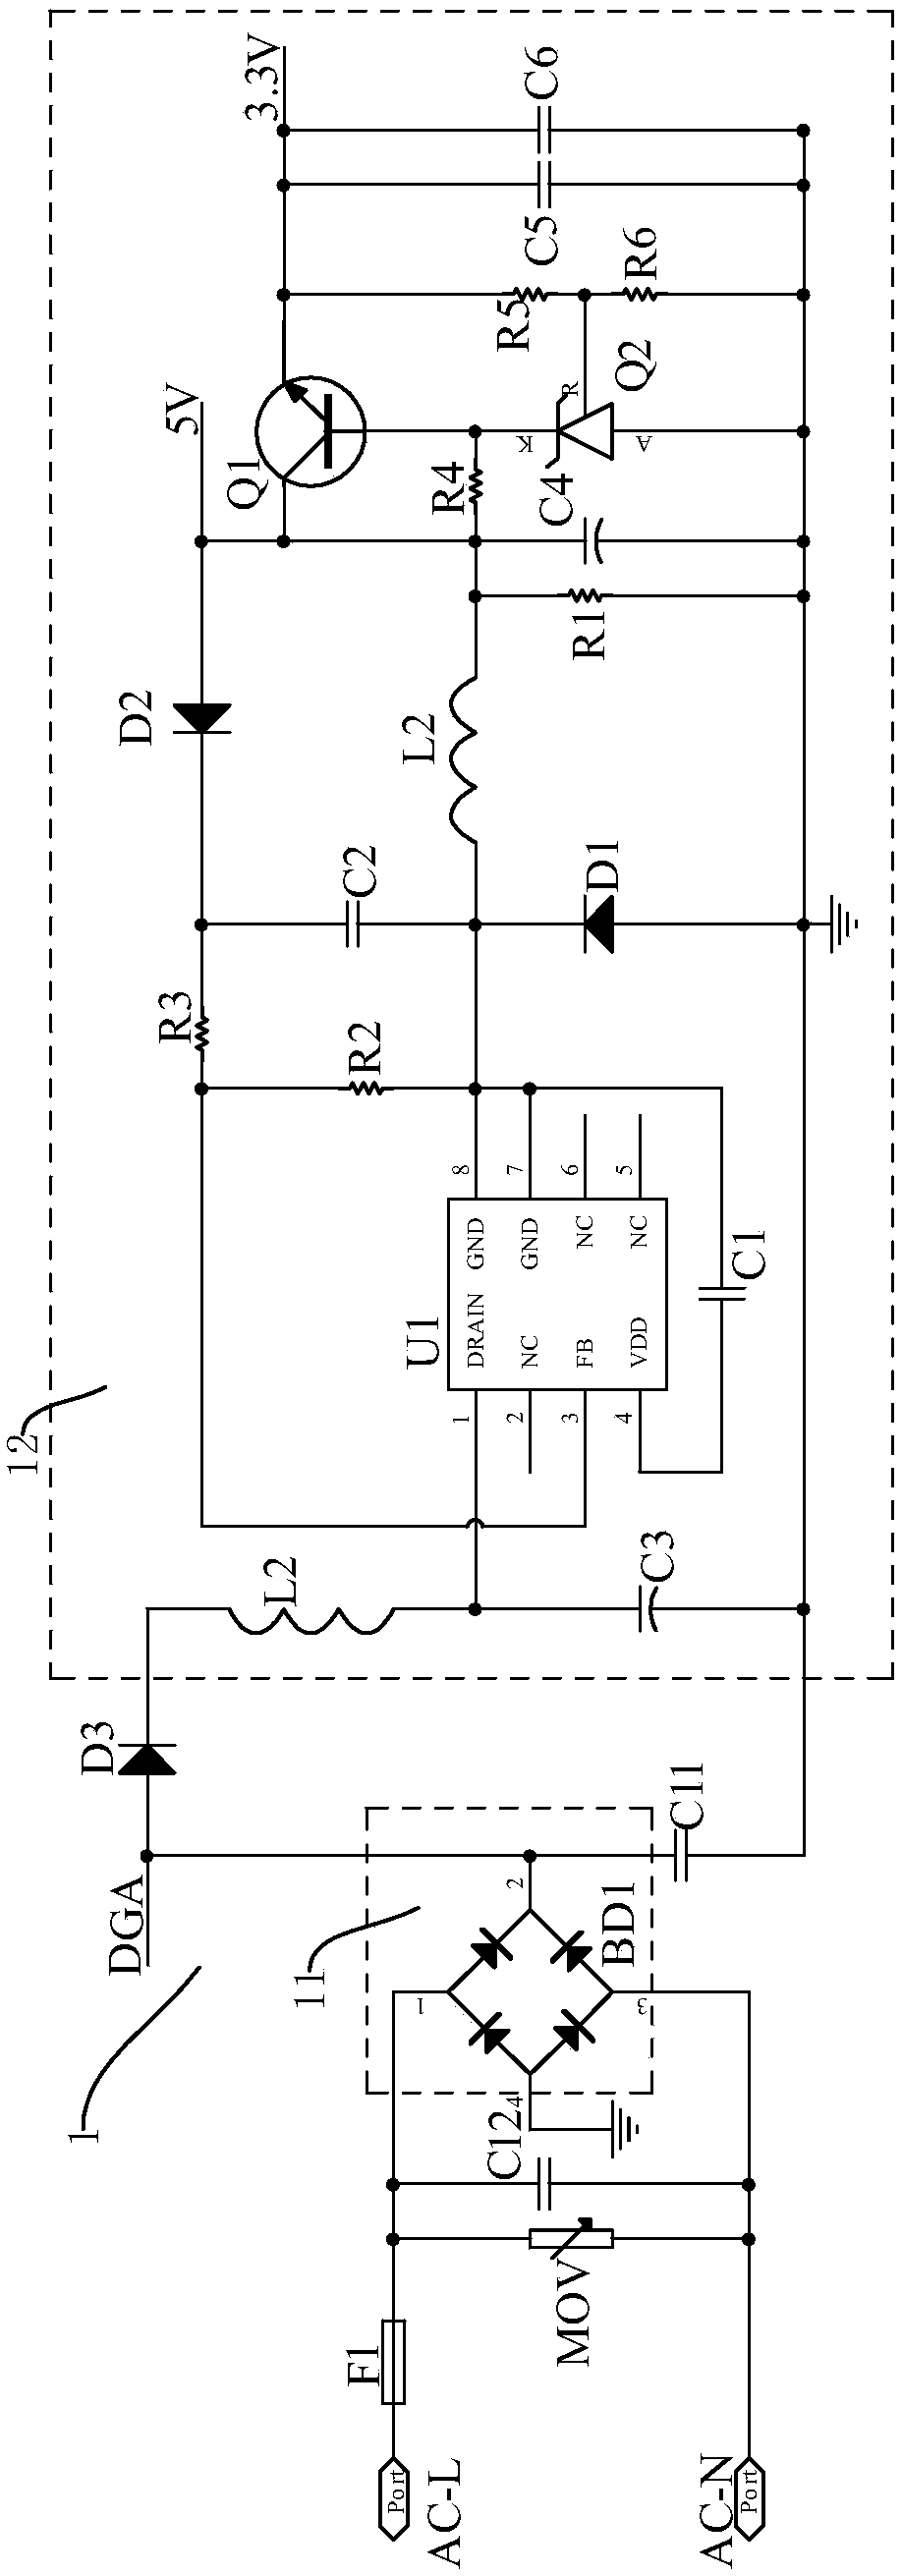 PWM (Pulse-Width Modulation) modulated LED drive circuit having power-off memory function